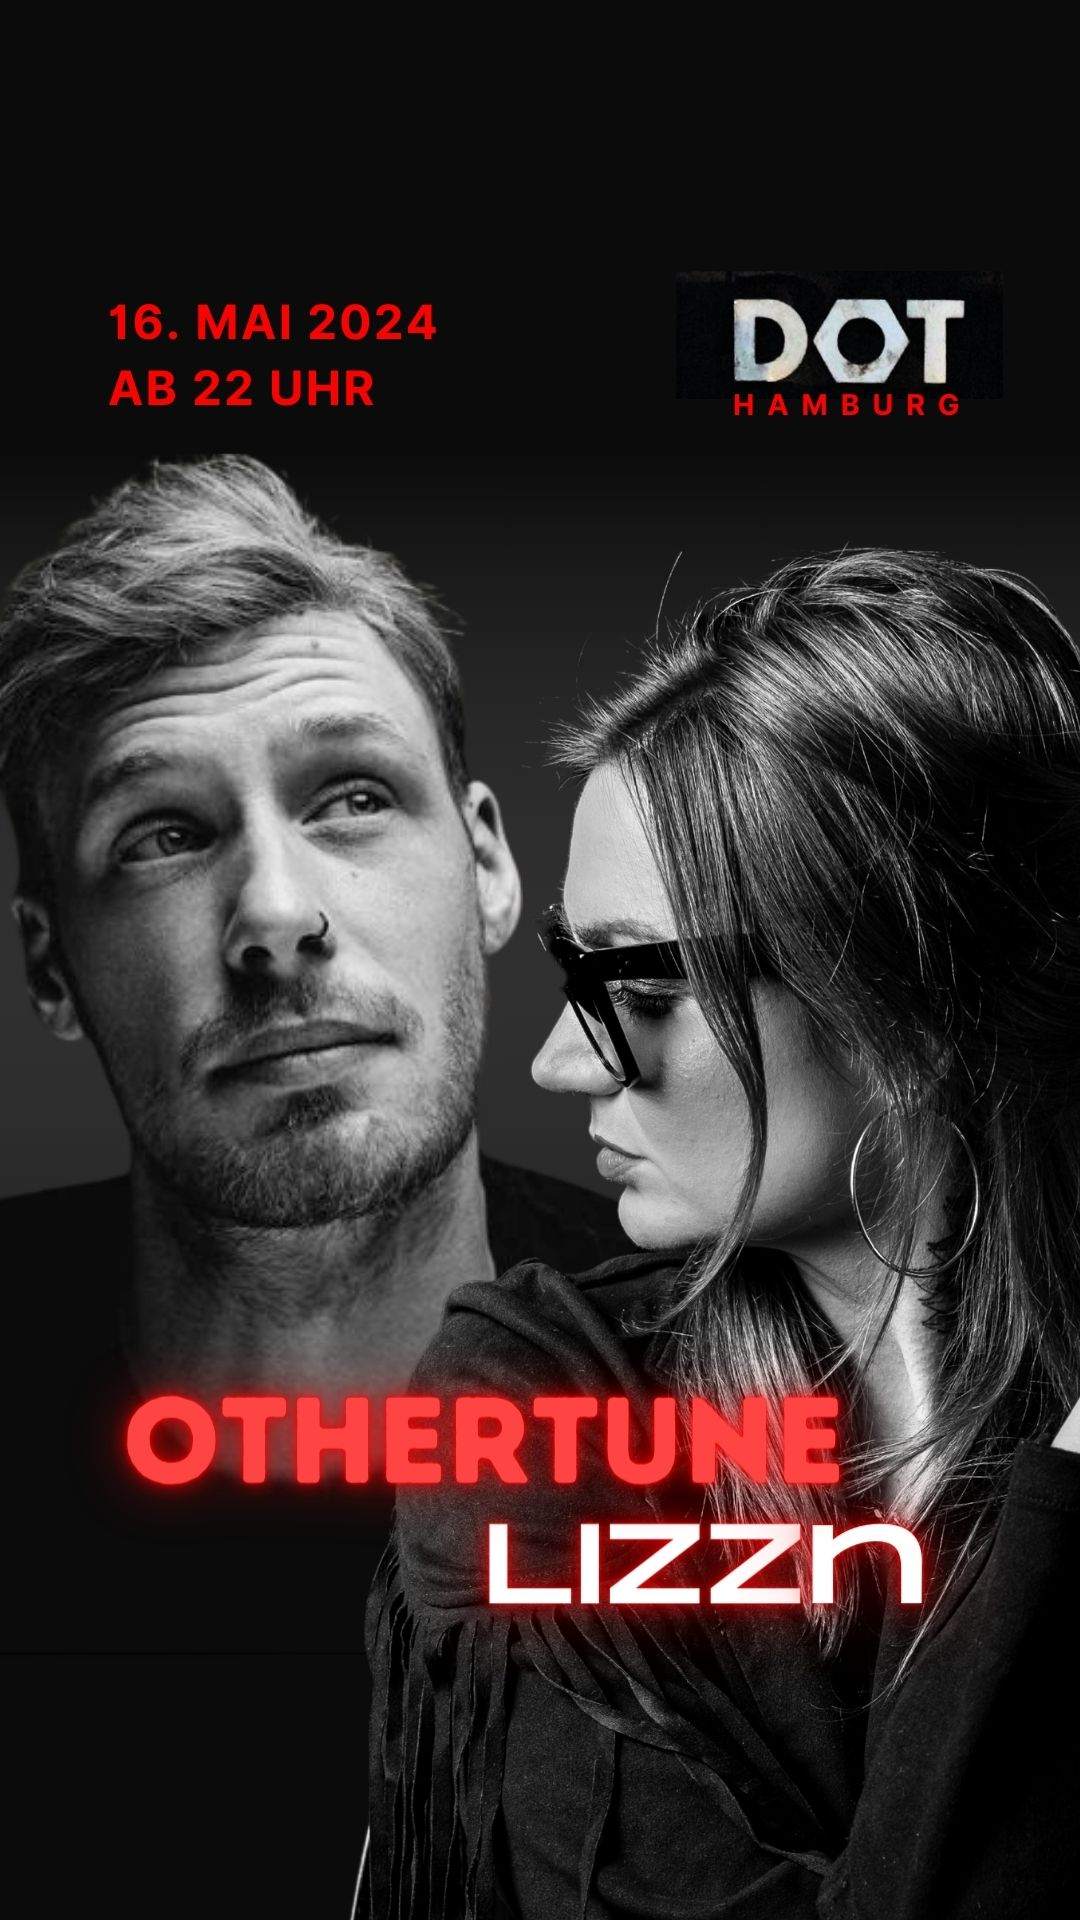 THURSDAYS at DOT with Othertune, LIZZN - フライヤー表